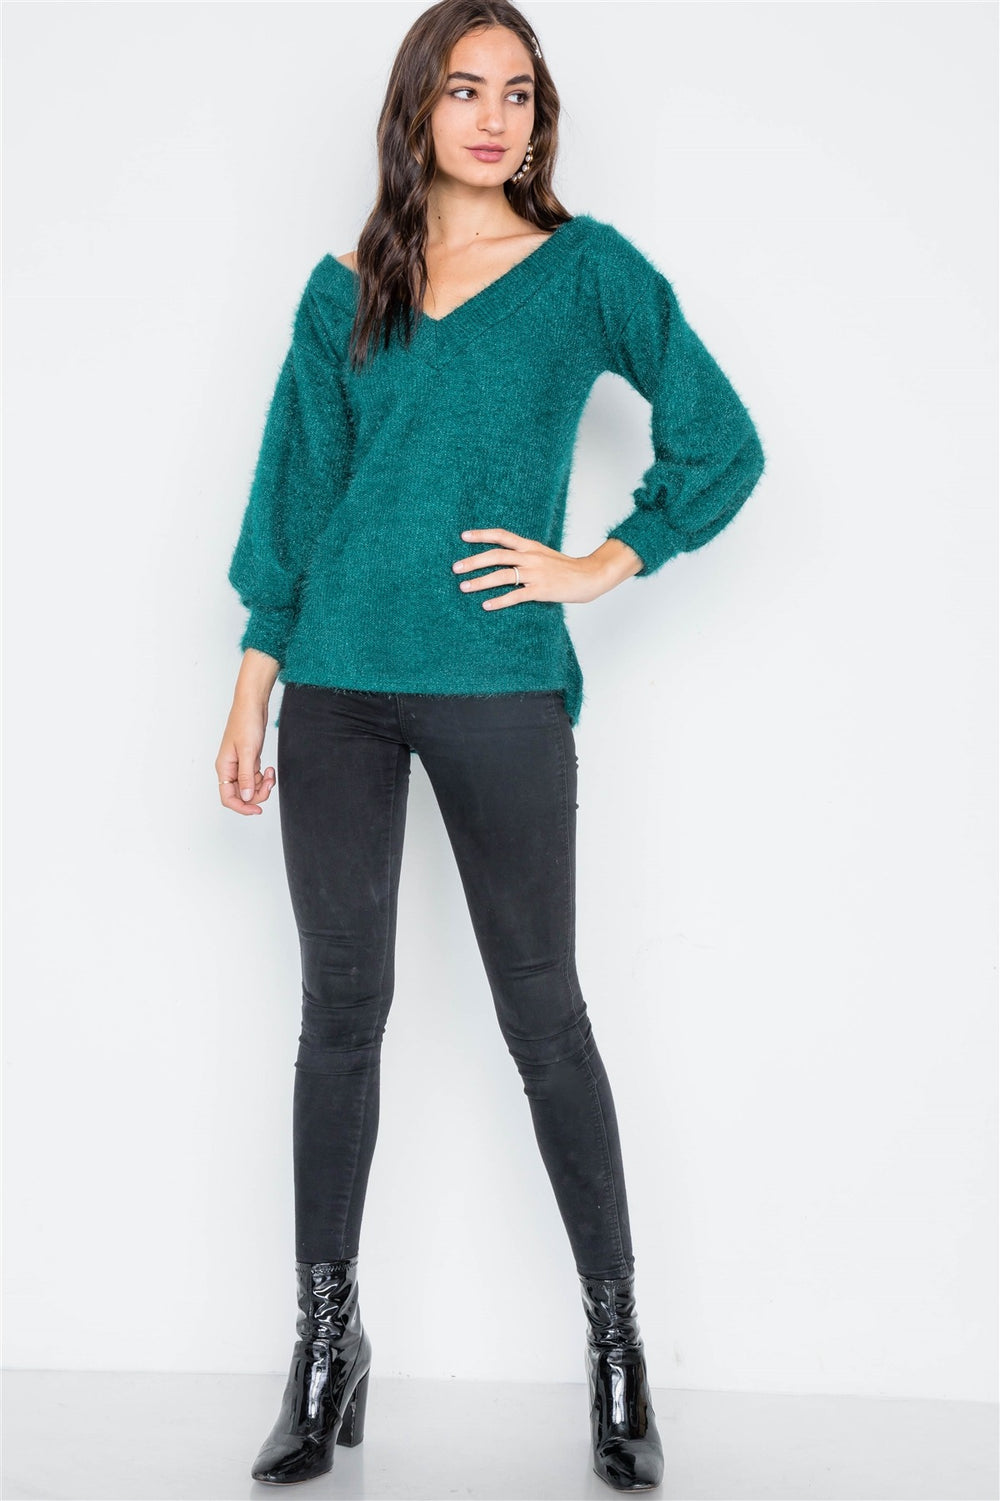 Teal Fuzzy Long Sleeve V-neck Sweater